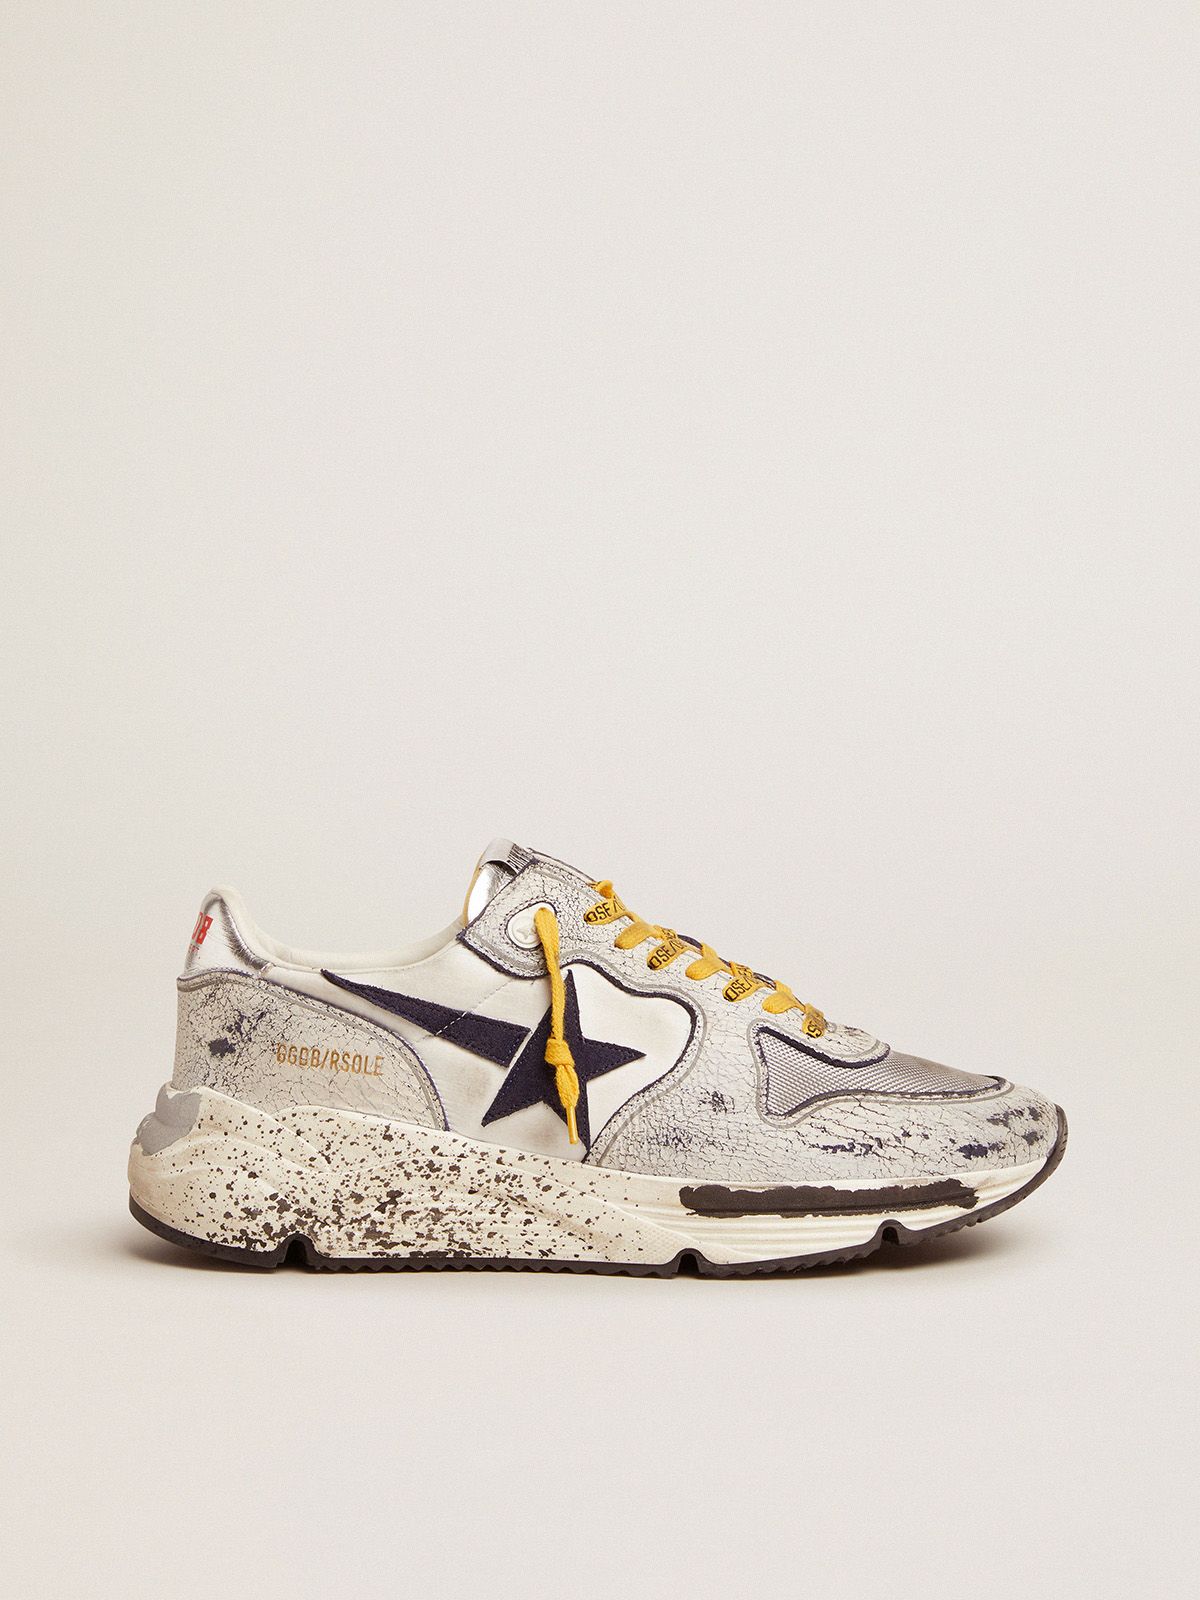 golden goose with crackle Sole in inserts sneakers white Running leather nylon